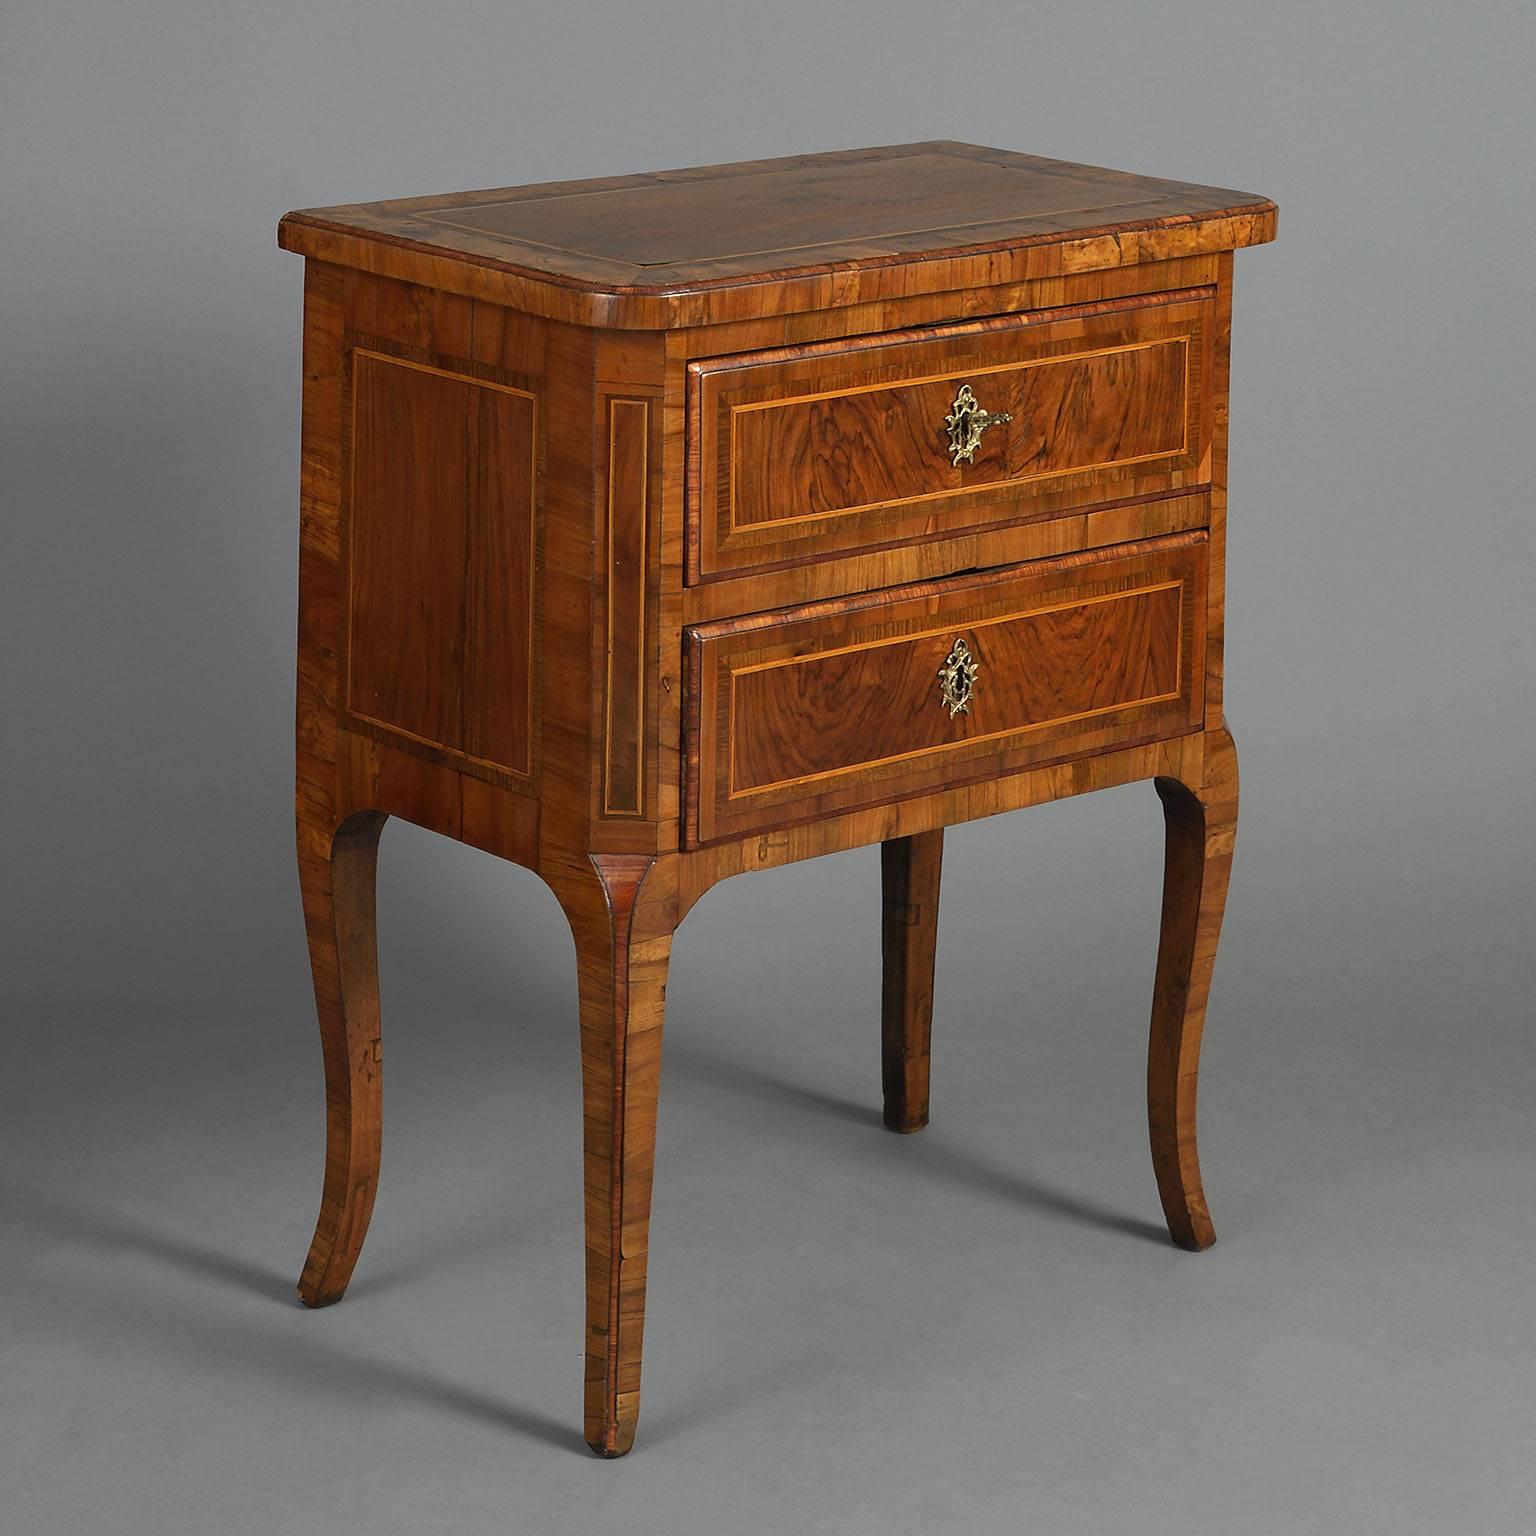 The cross-banded top with rounded corners above two similarly cross-banded drawers raised on cross-grain veneered cabriole legs. Inventory mark 